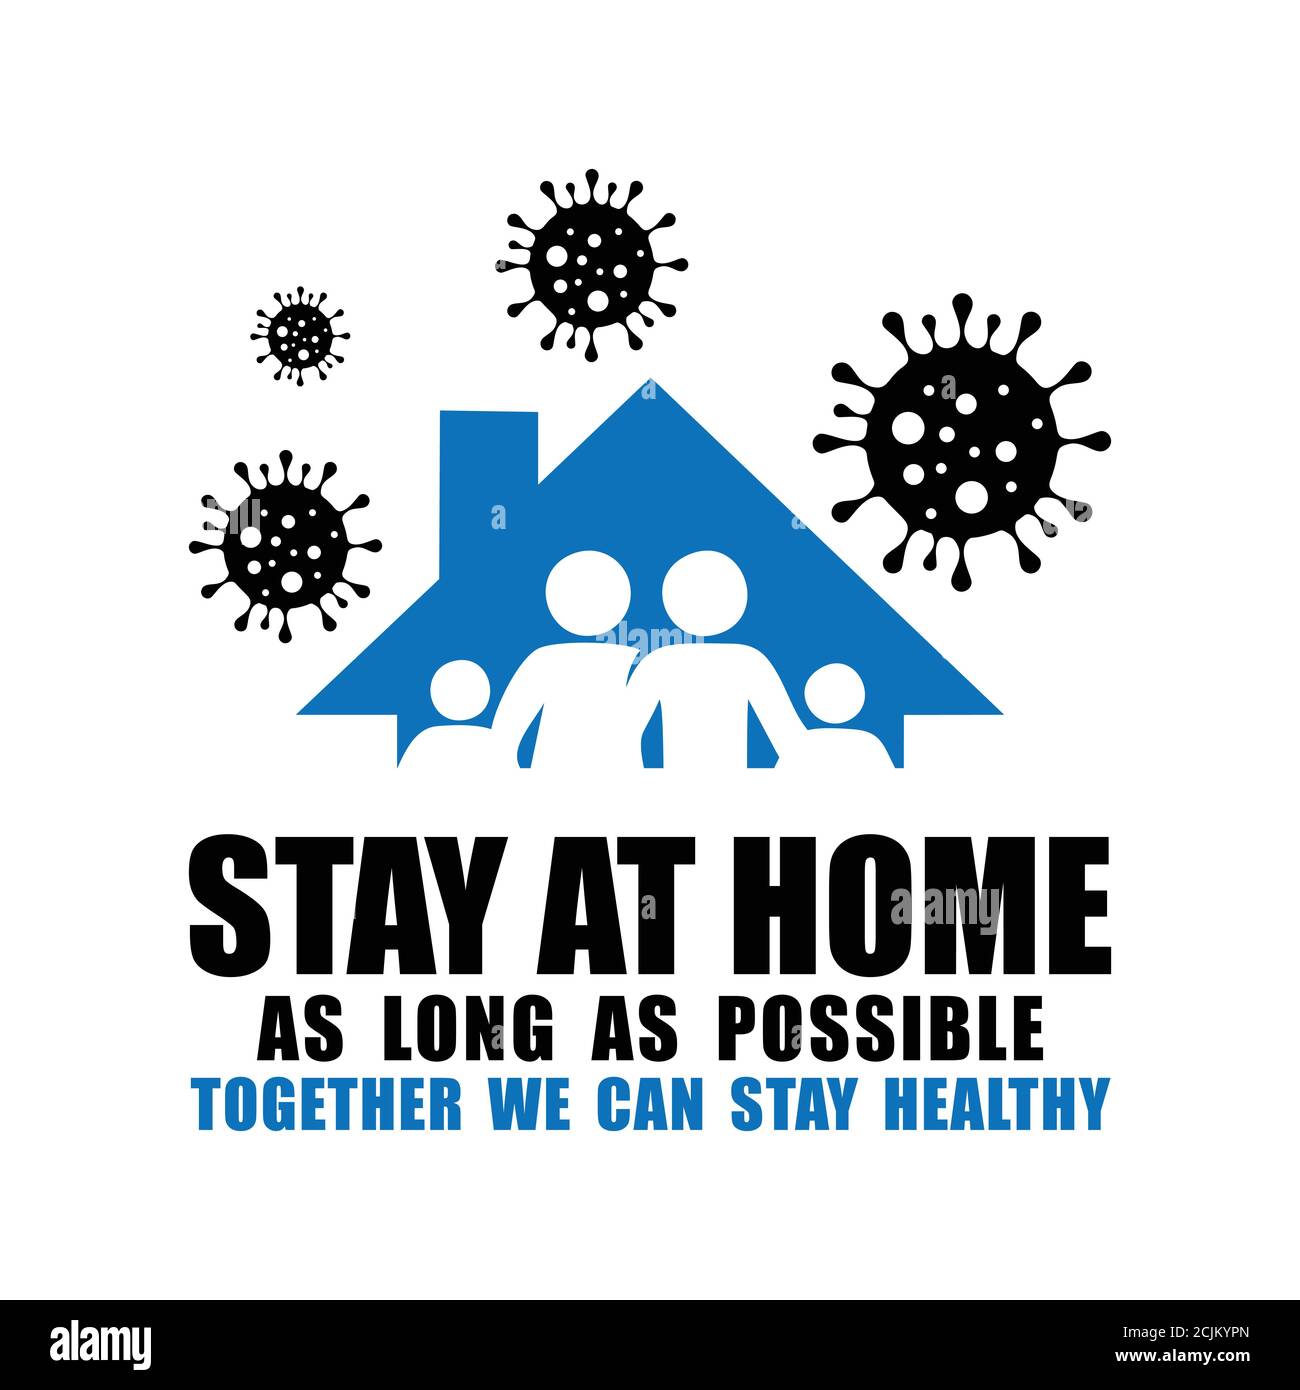 Stop the spread of Germs by stay at home as long as possible sign vector format in blue and black color option Stock Vector